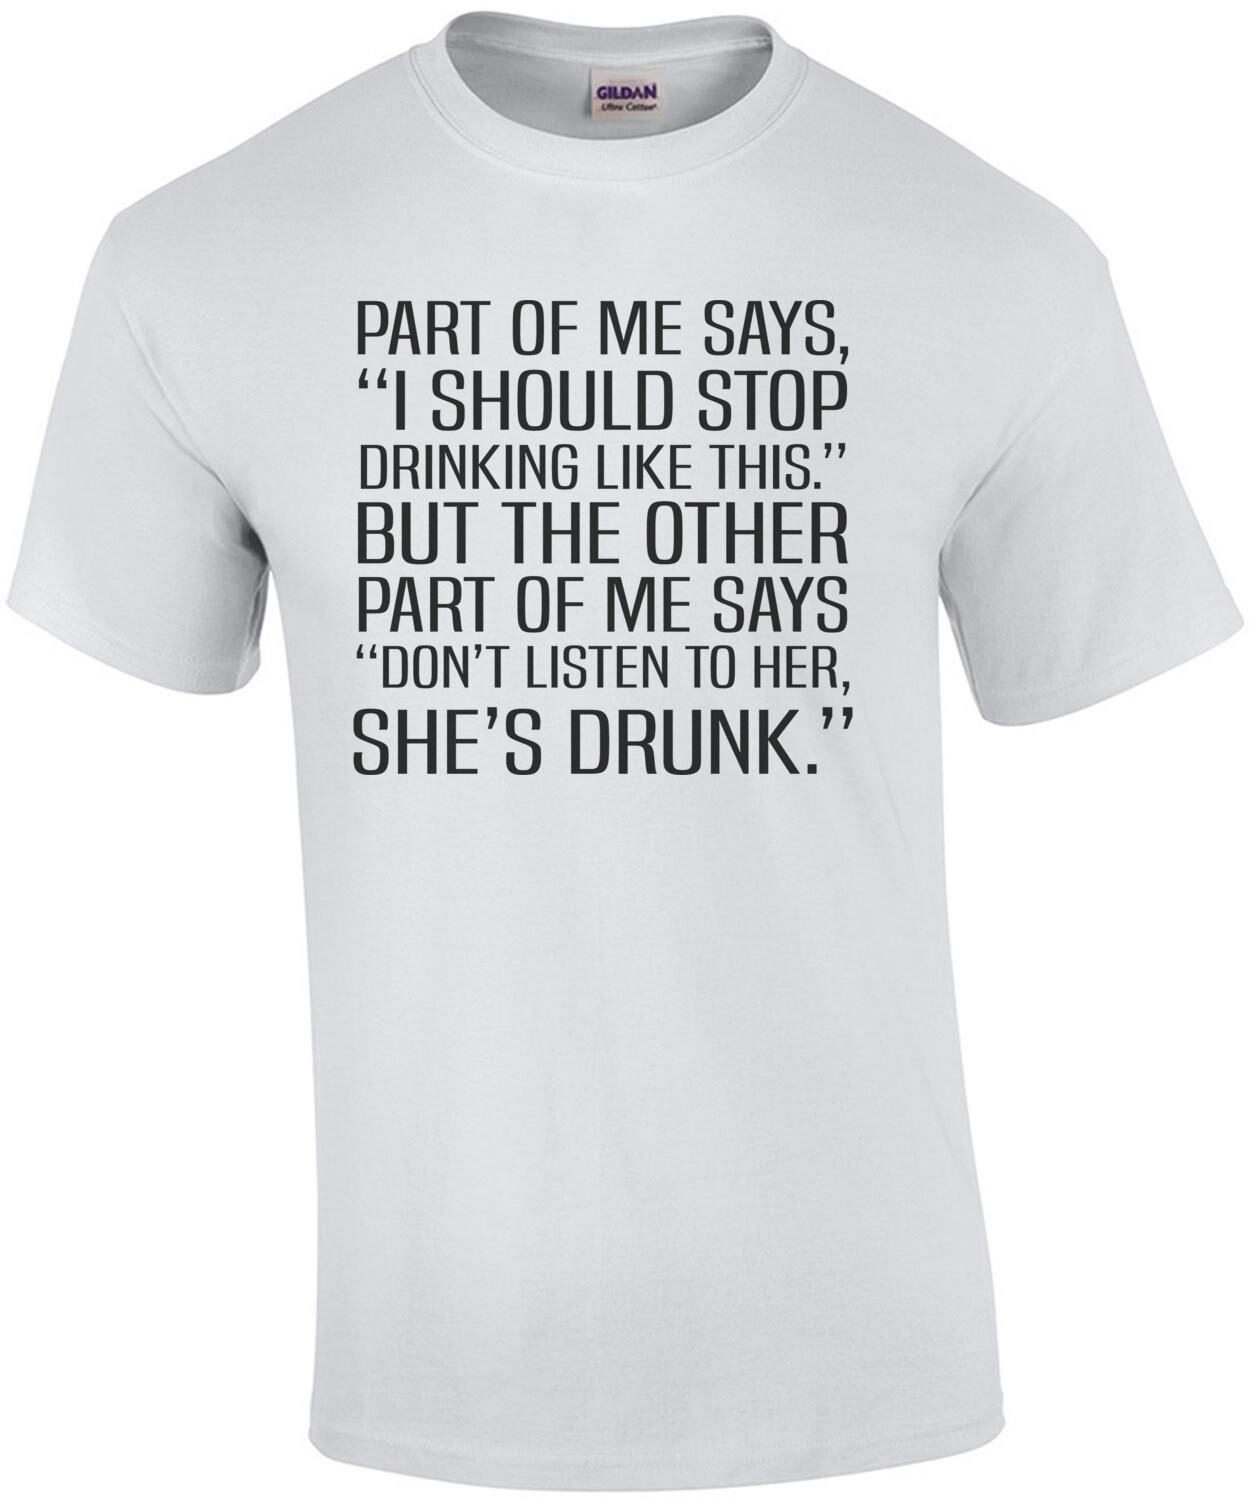 Part of me says, I should stop drinking - funny drinking t-shirt